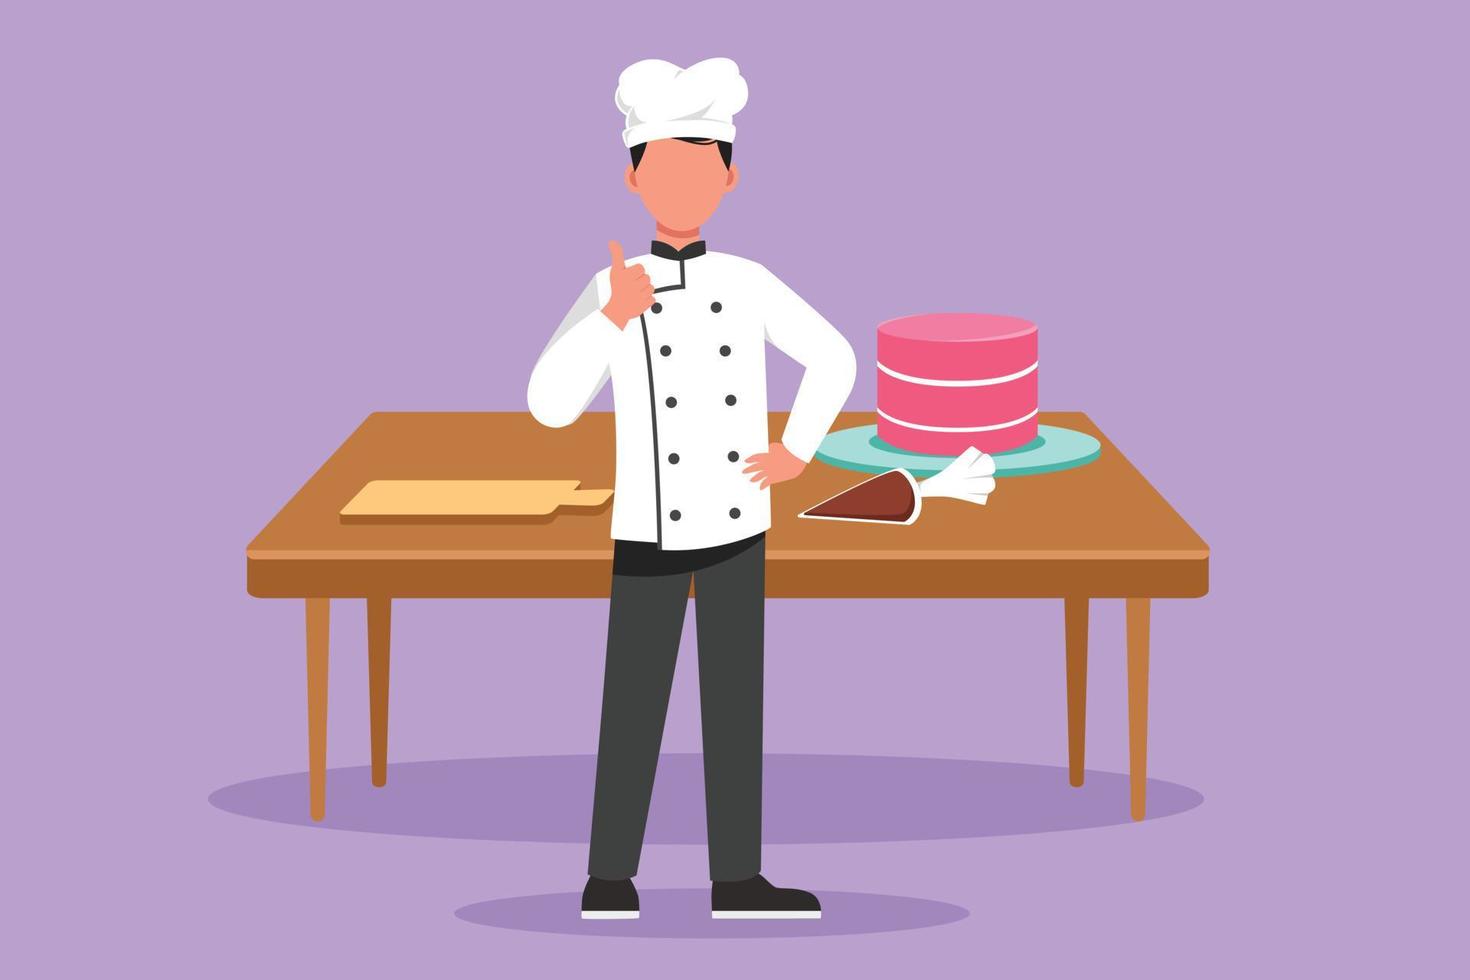 Cartoon flat style drawing chef stands with a thumbs up gesture and cooking uniform prepares the ingredients to cook the best dishes. Male chef with table and cake. Graphic design vector illustration